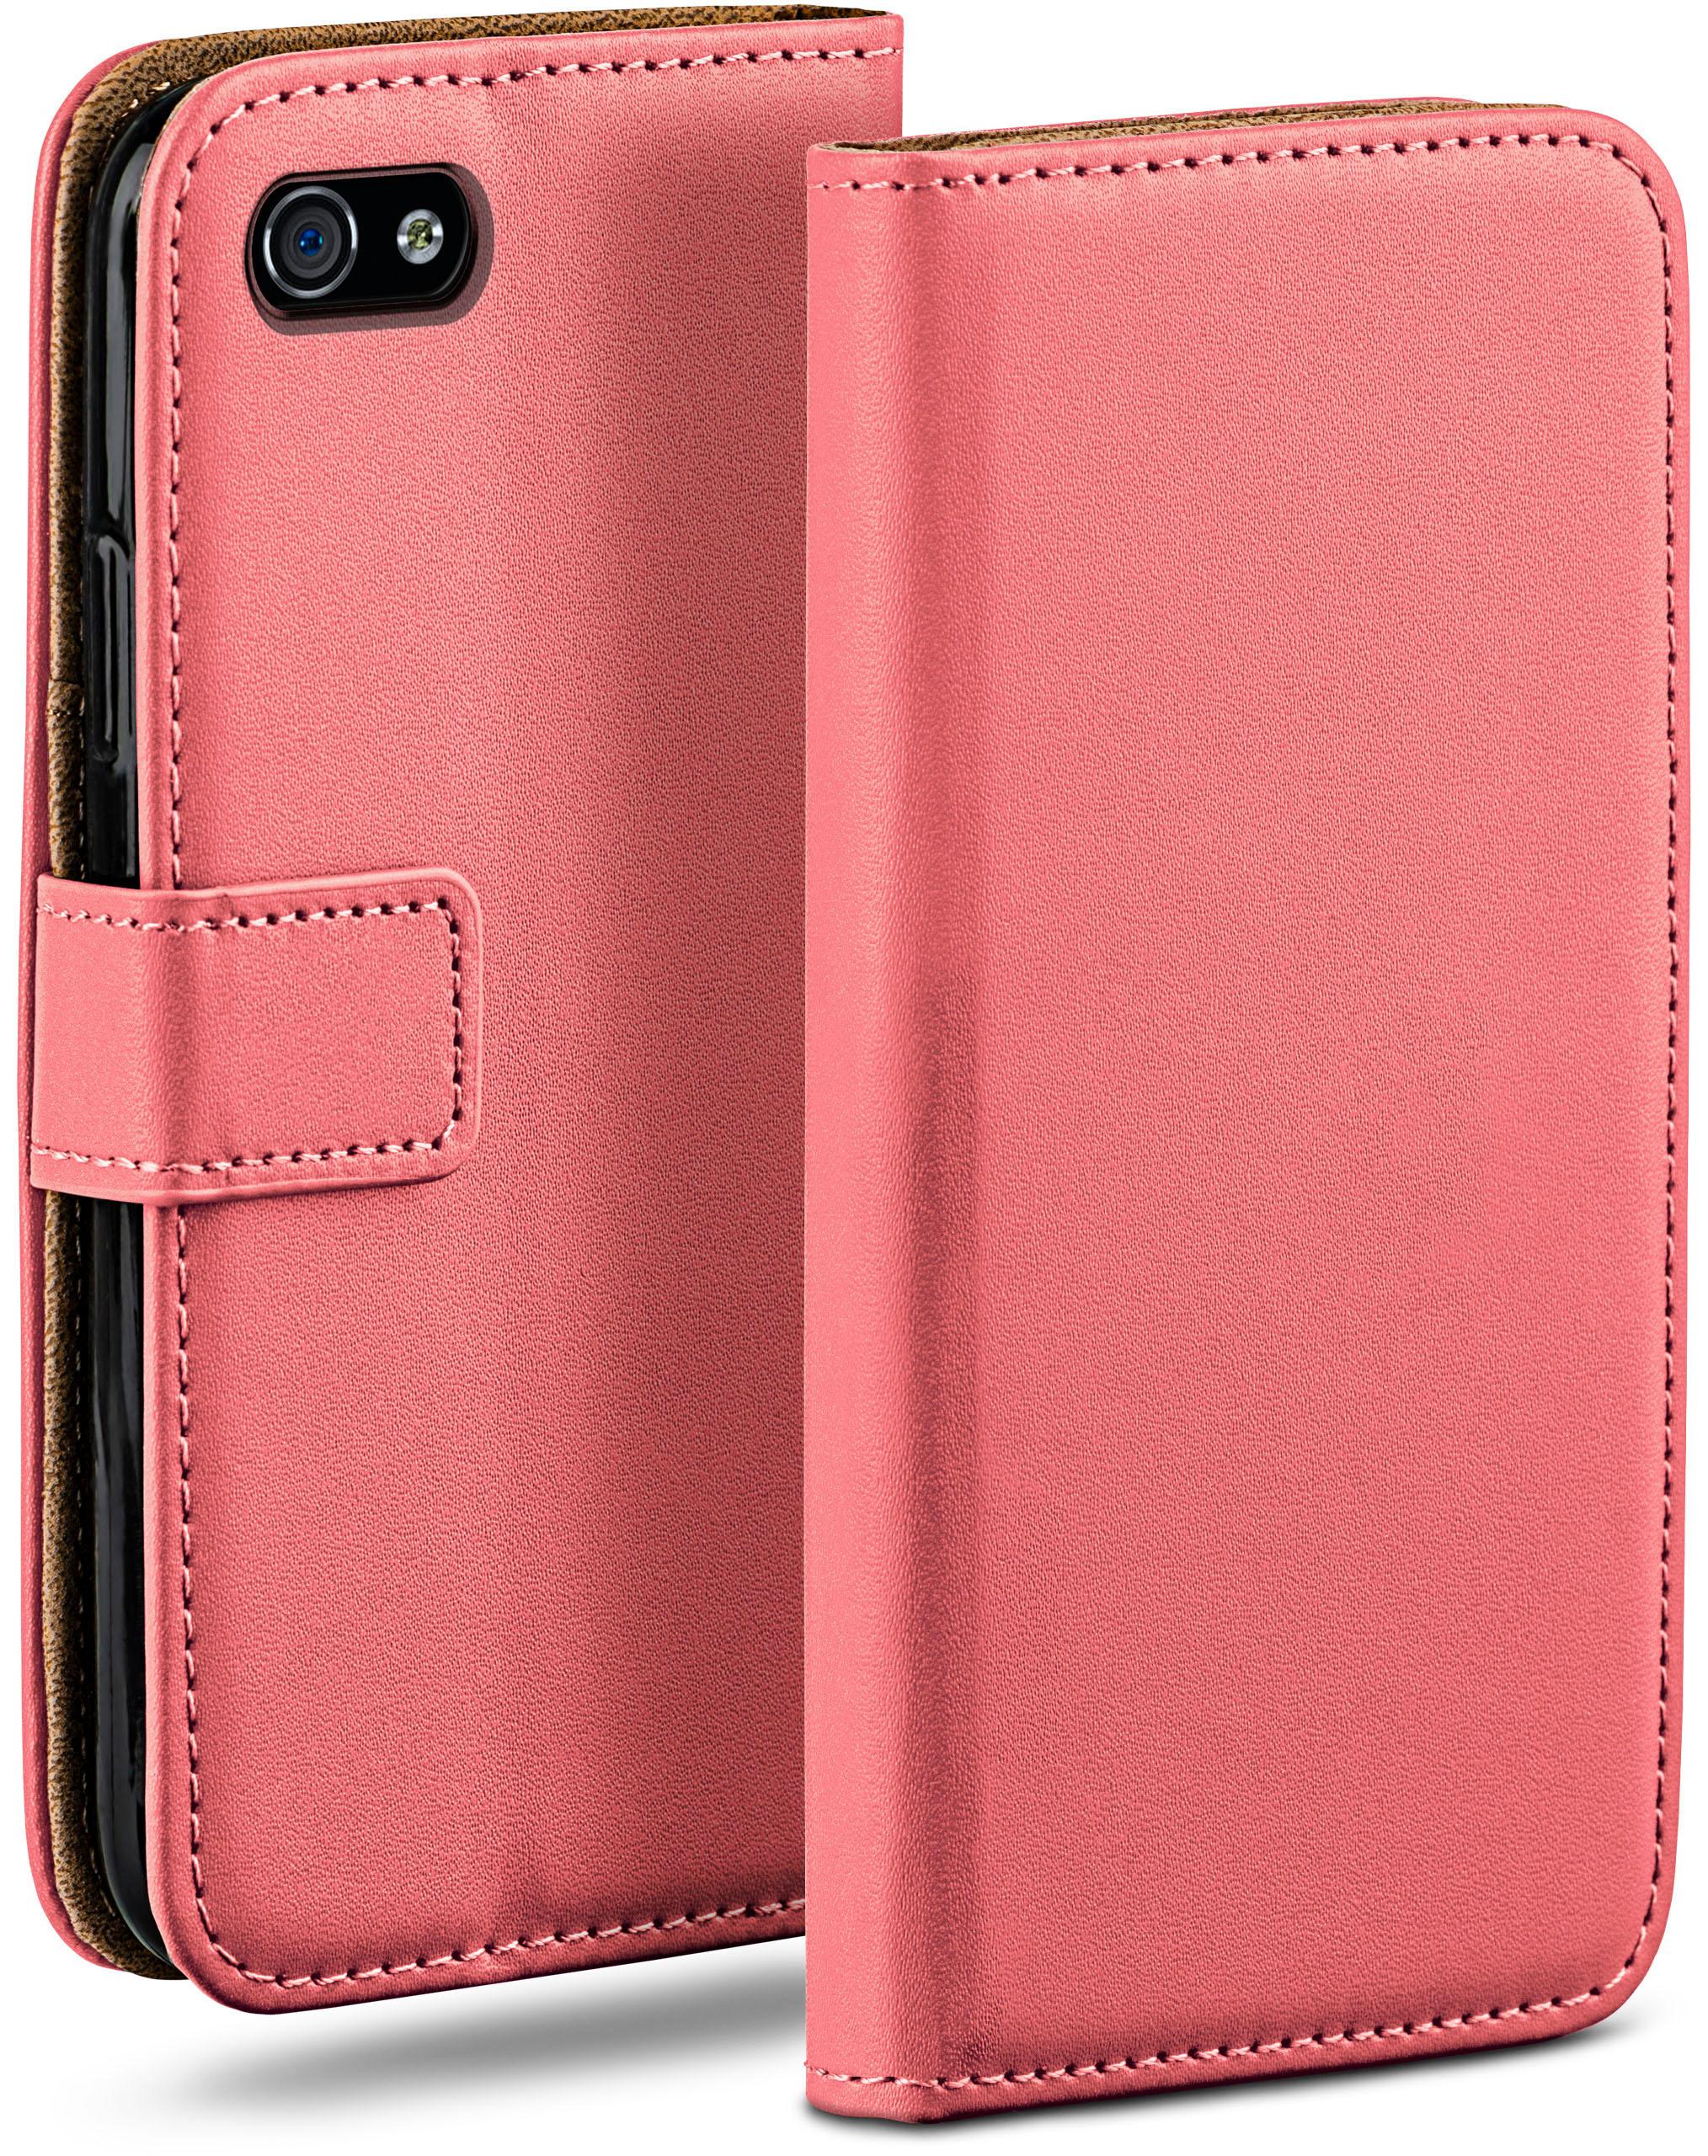 Book Bookcover, 4, MOEX Coral-Rose iPhone Case, / iPhone 4s Apple,